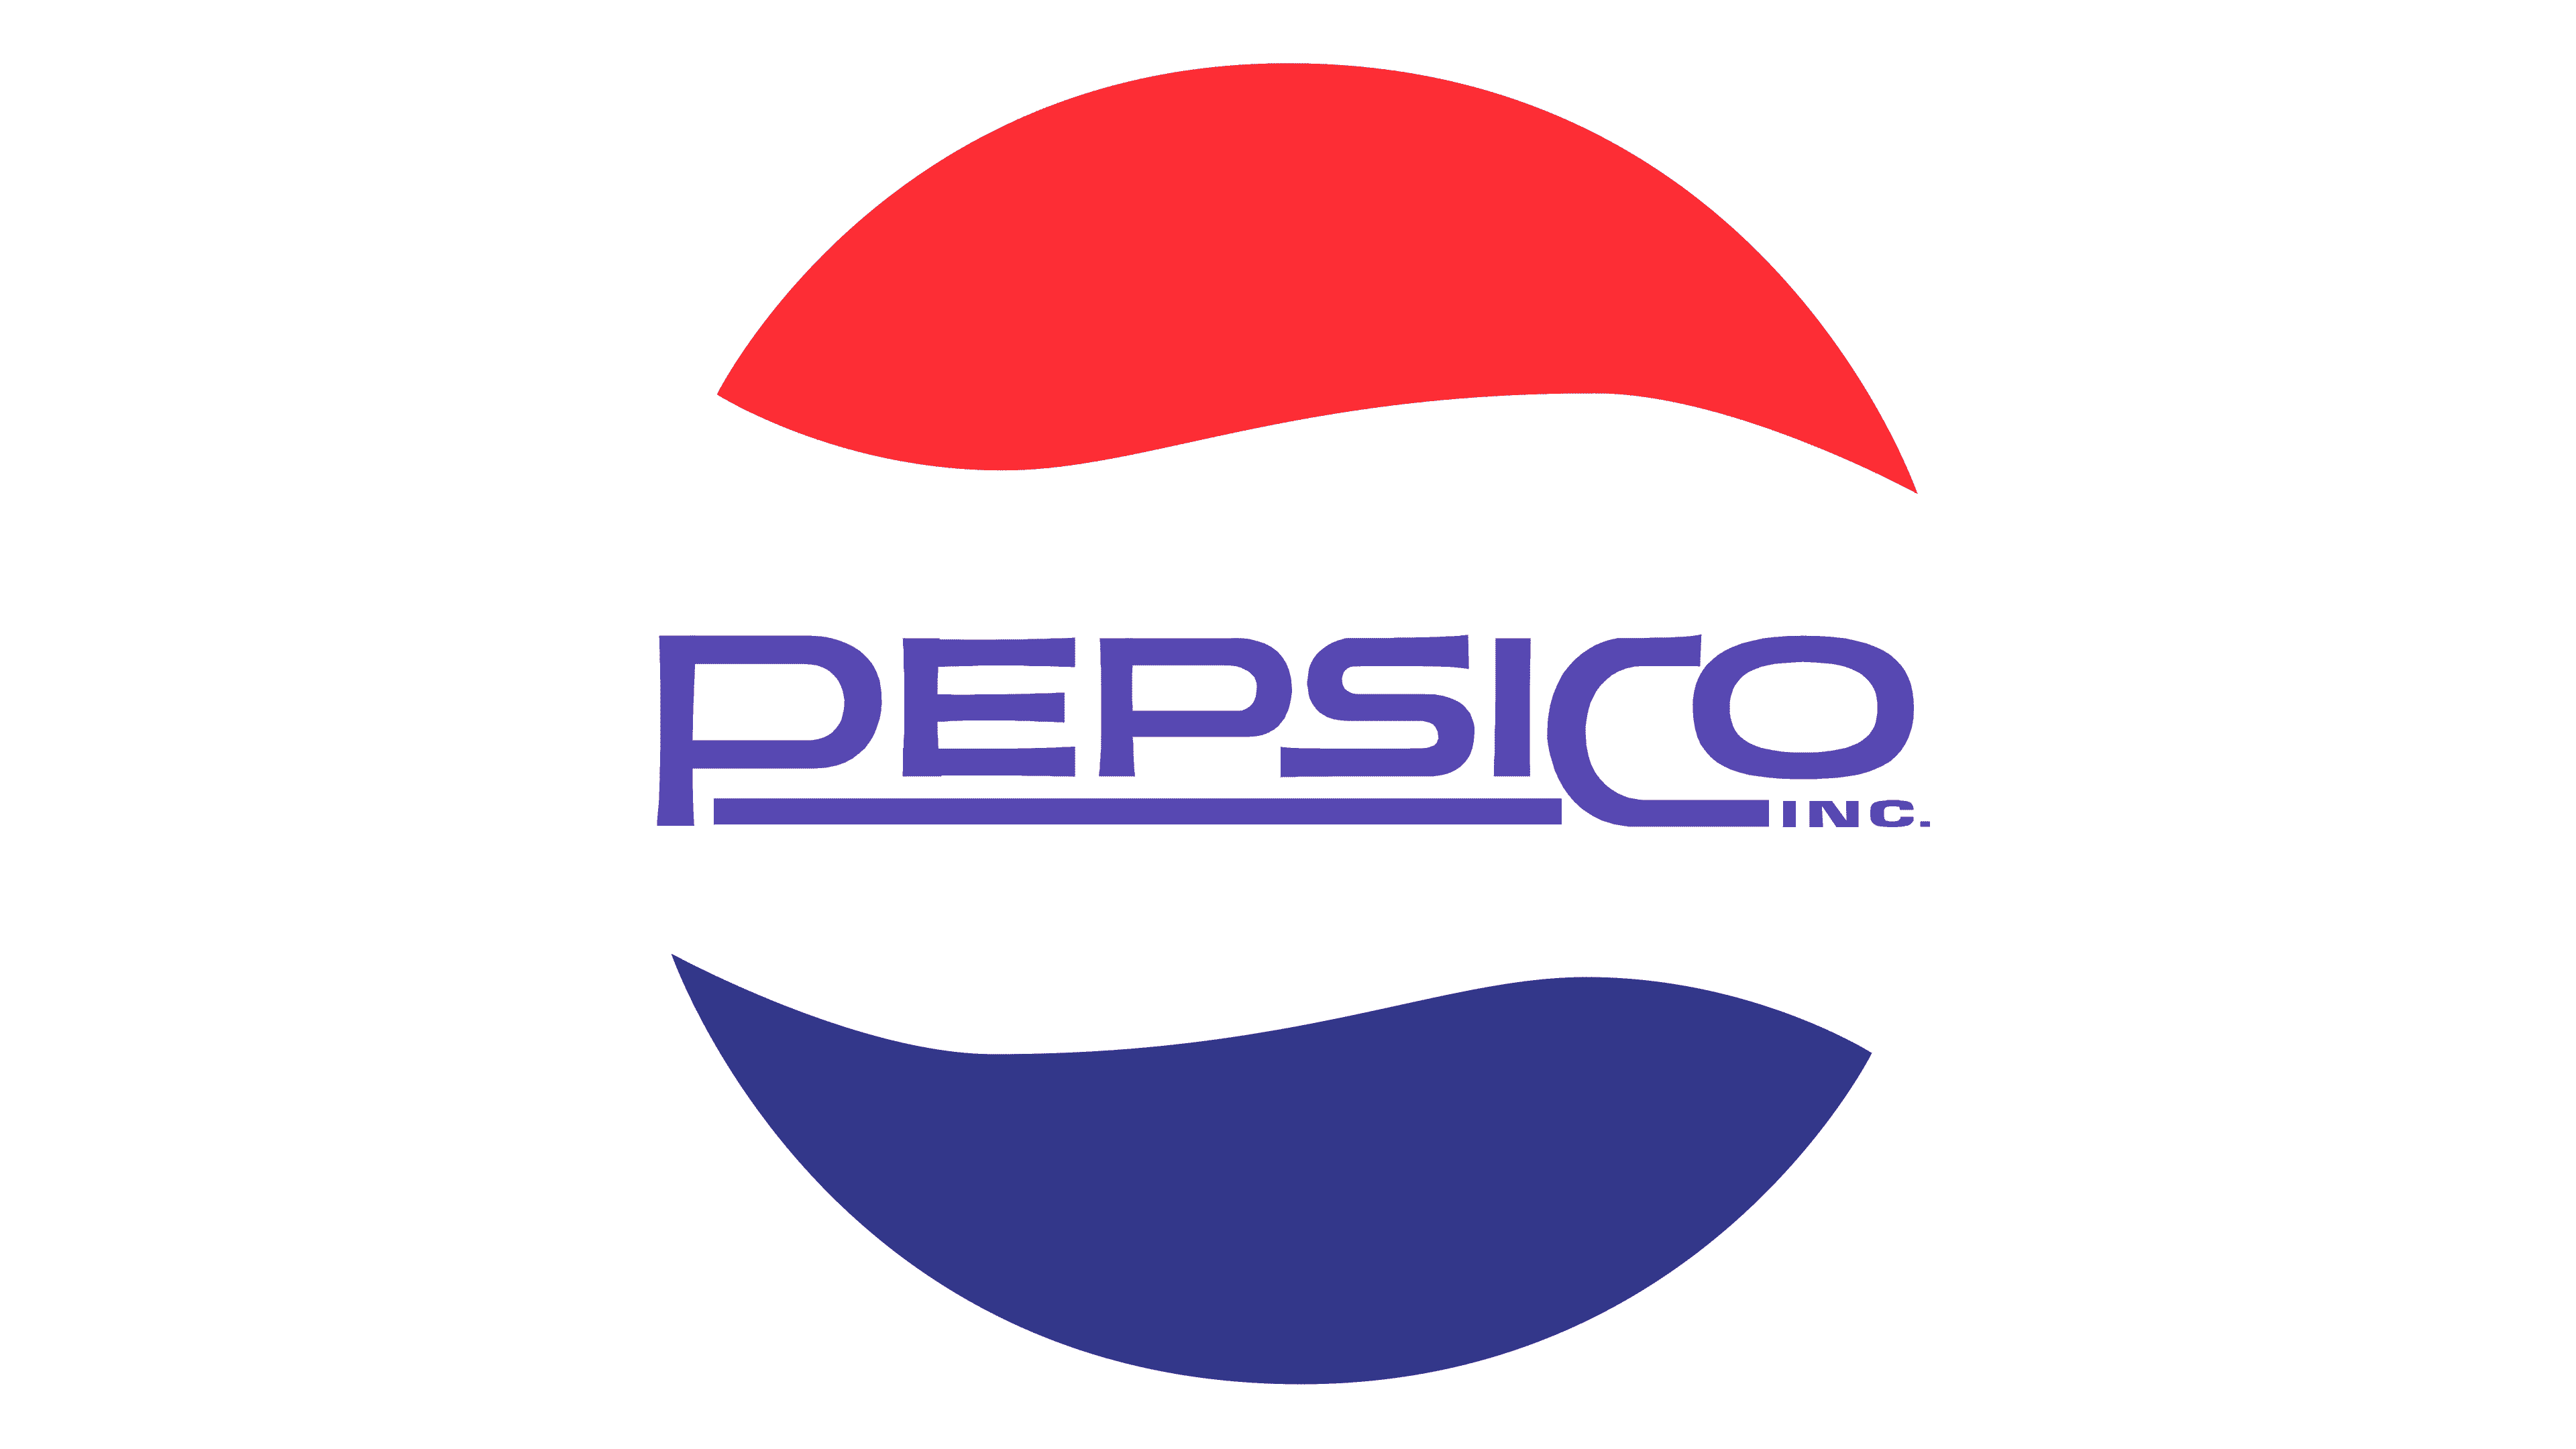 Top 99 pepsico inc logo most viewed and downloaded